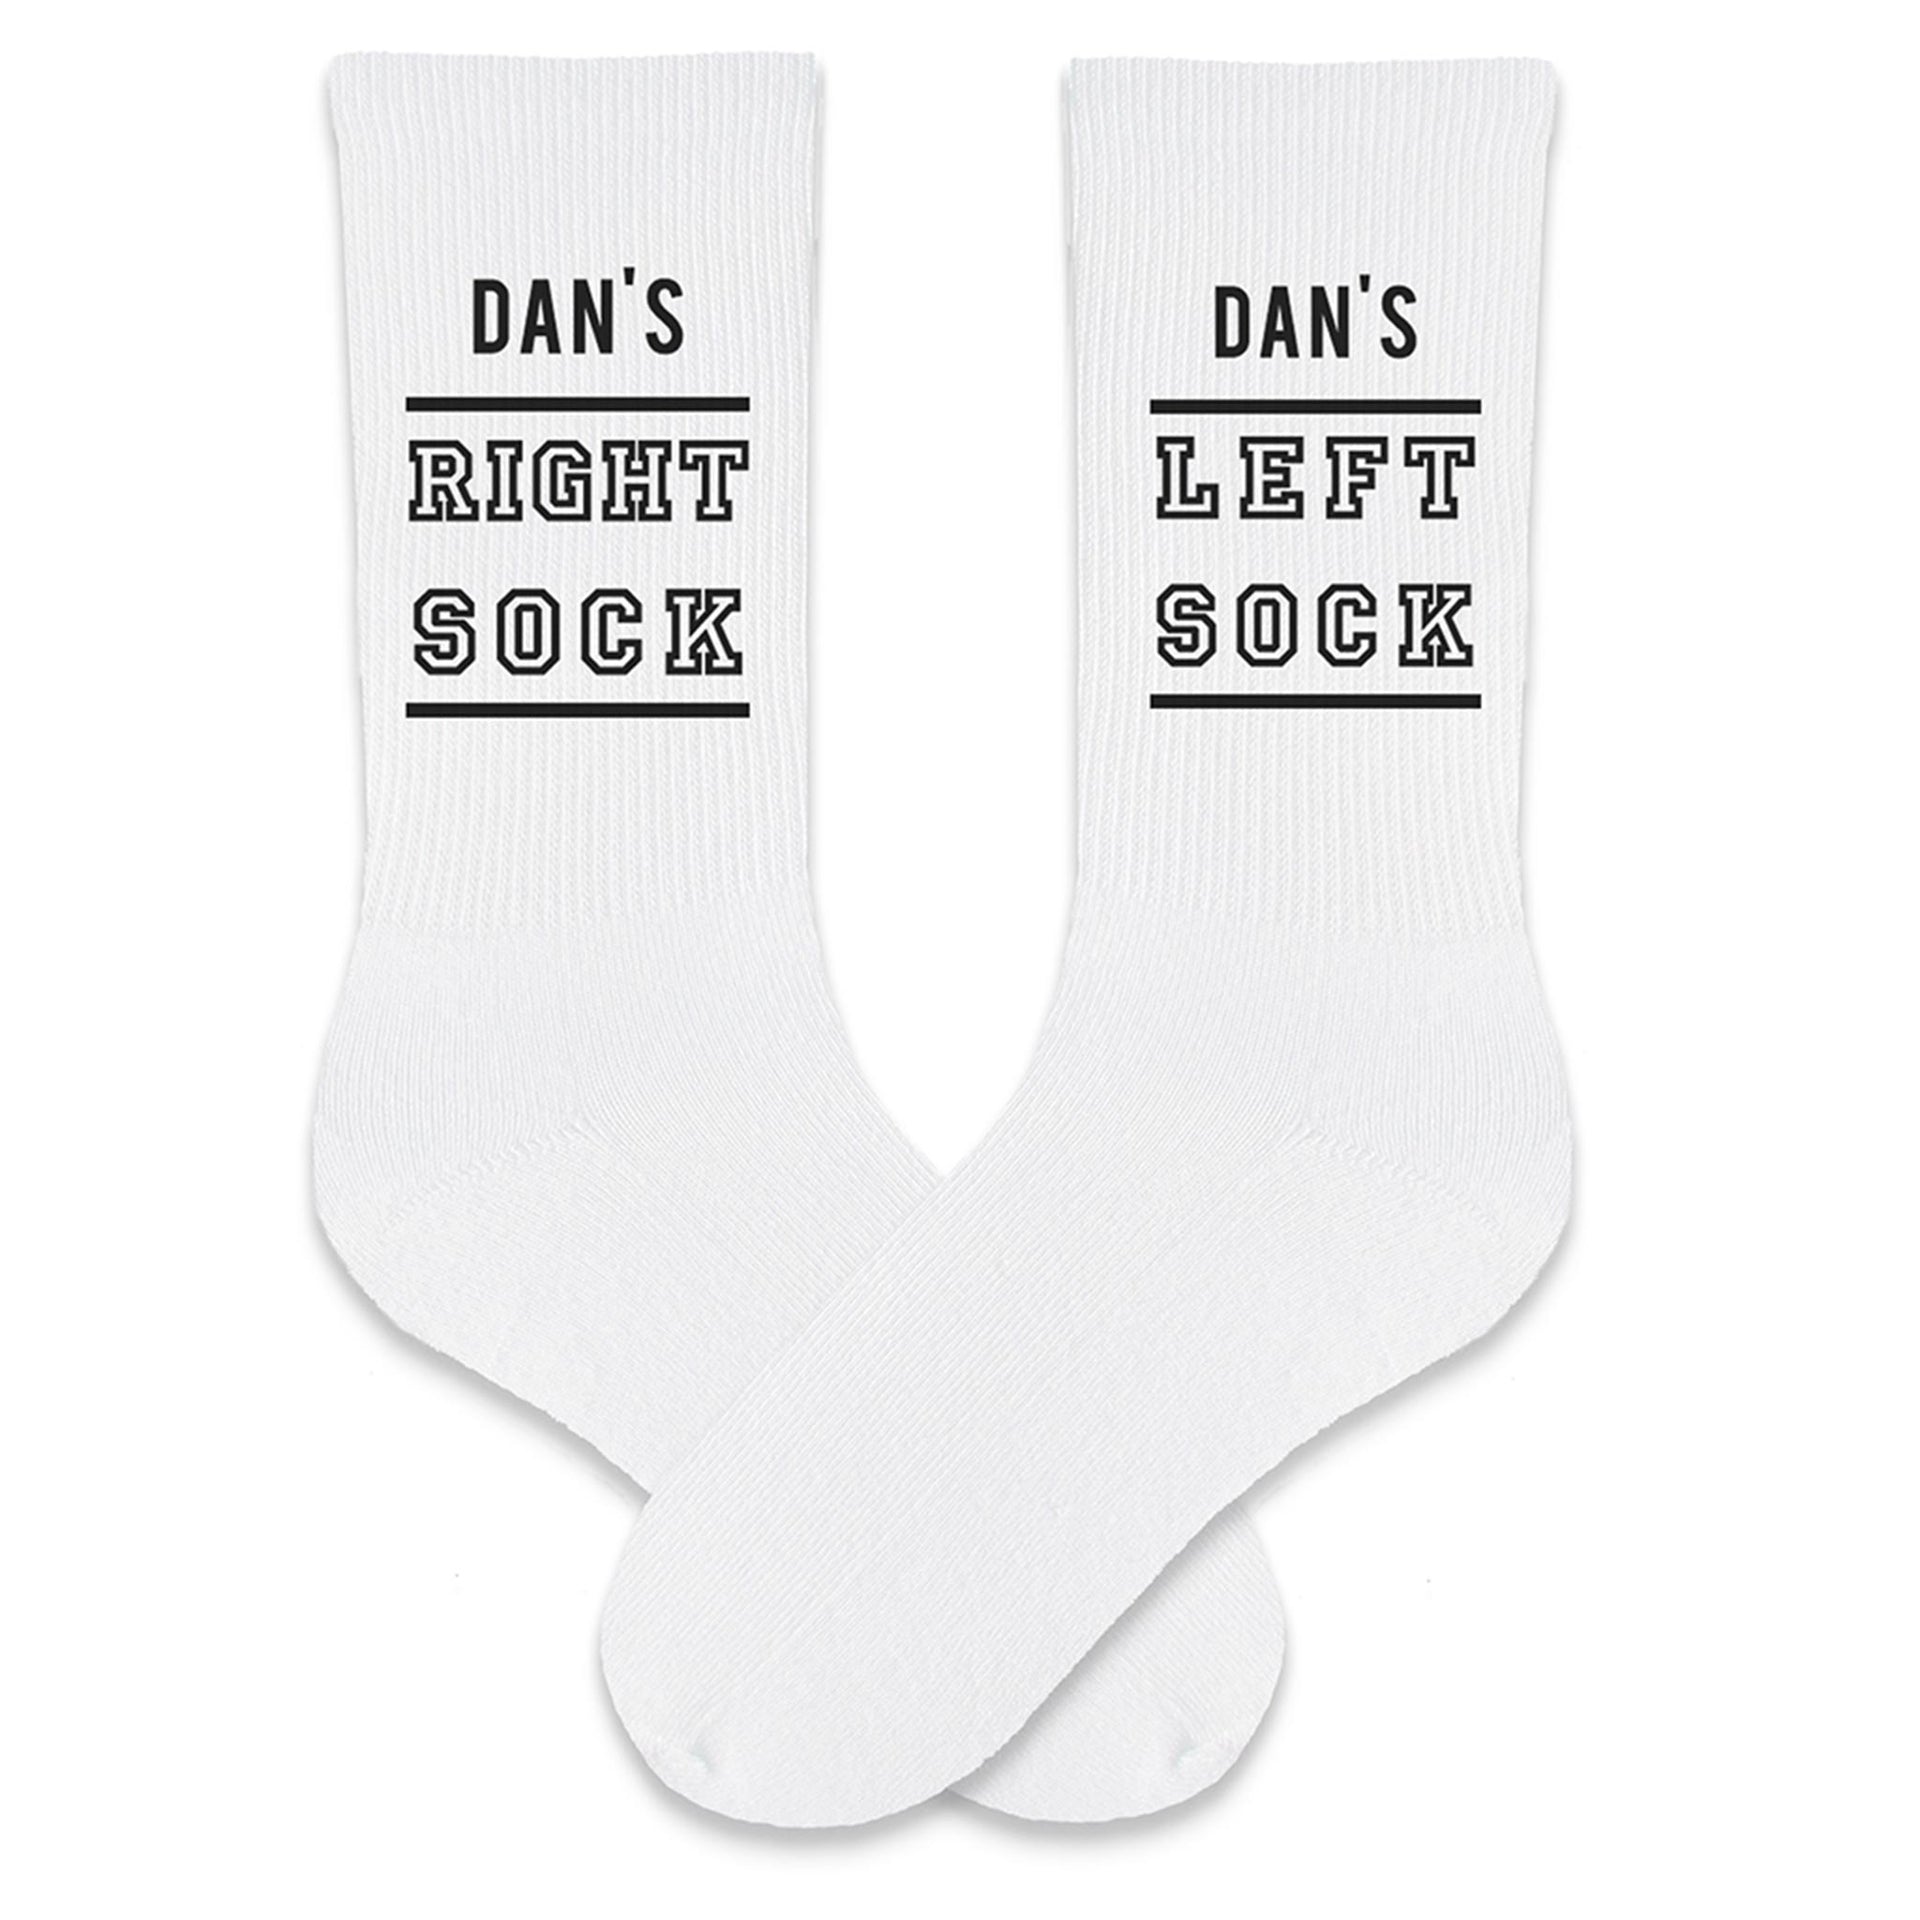 Your name with right and left custom printed on crew socks.